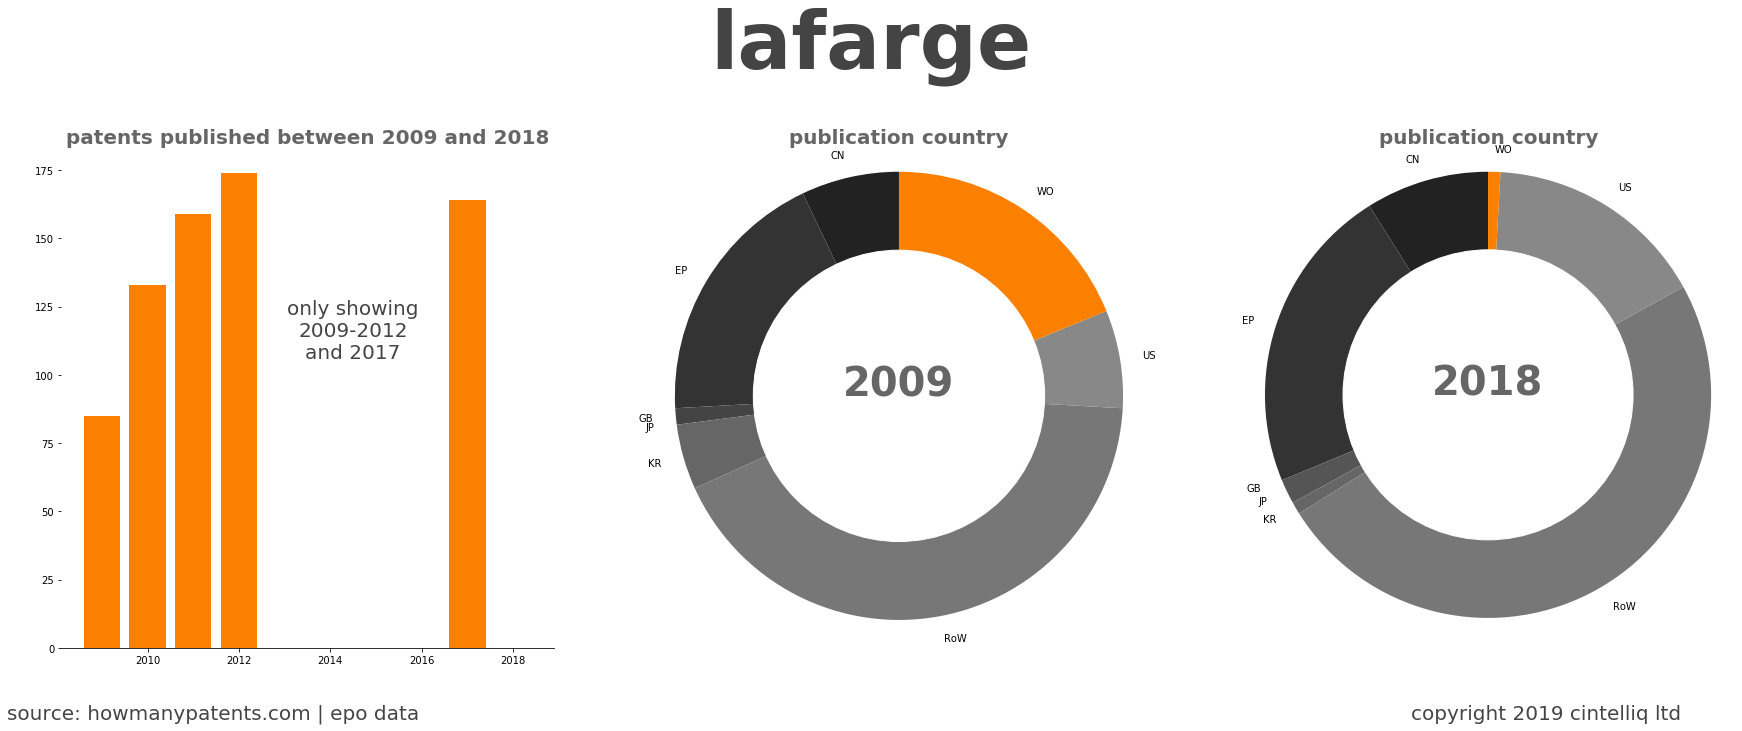 summary of patents for Lafarge